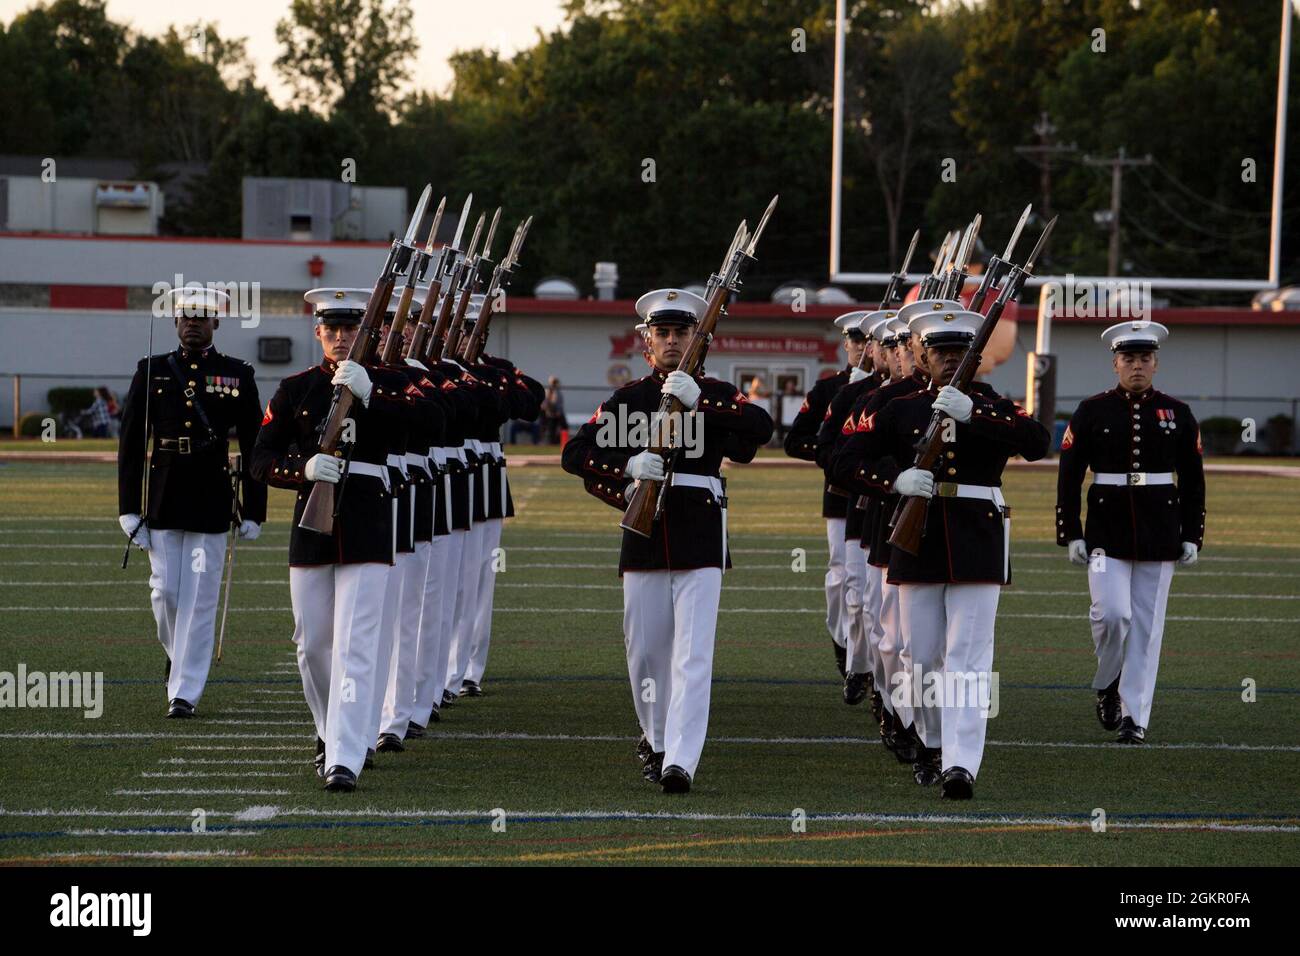 Marines with the Silent Drill Platoon march off the field during the Basilone Bowl halftime show at Bridgewater-Raritan High School, Raritan, N.J., June 16, 2021. The Basilone Bowl is an All-Star Football game which features the Devil Dogs versus the Leathernecks and is played in honor of GySgt. John Basilone, a Medal of Honor and Navy Cross recipient. Stock Photo